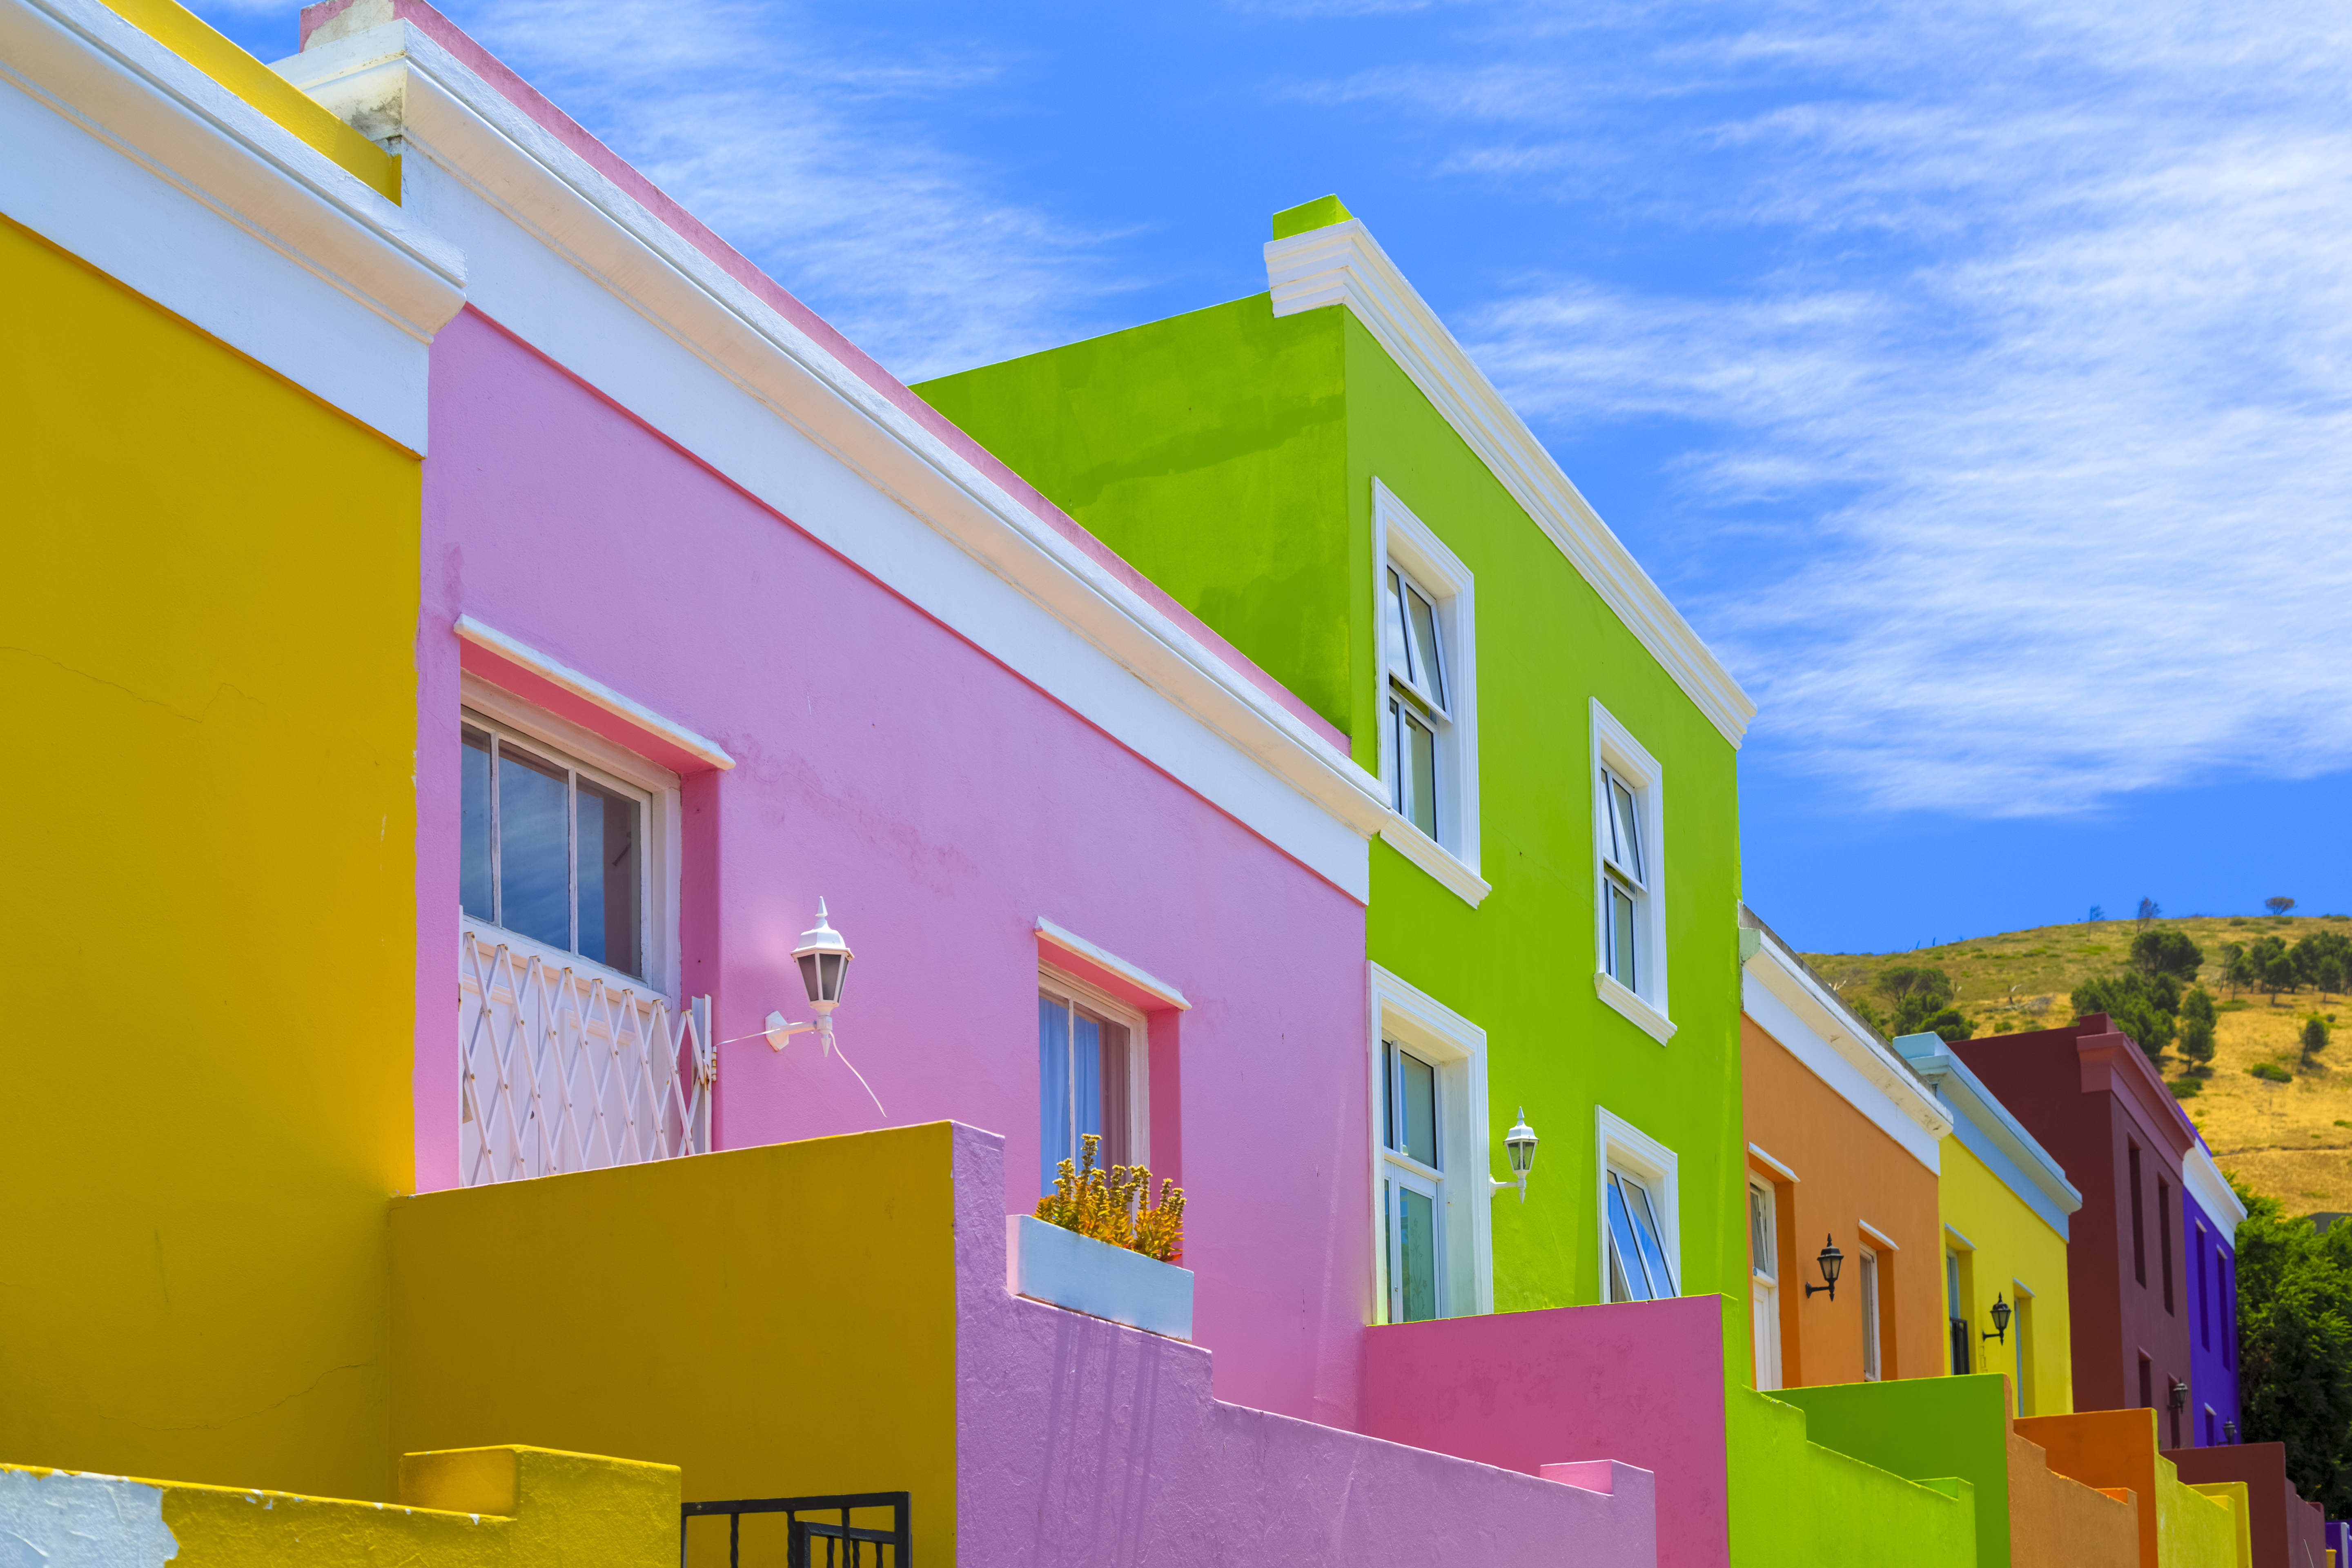 Historic Bo-Kaap township in Cape Town